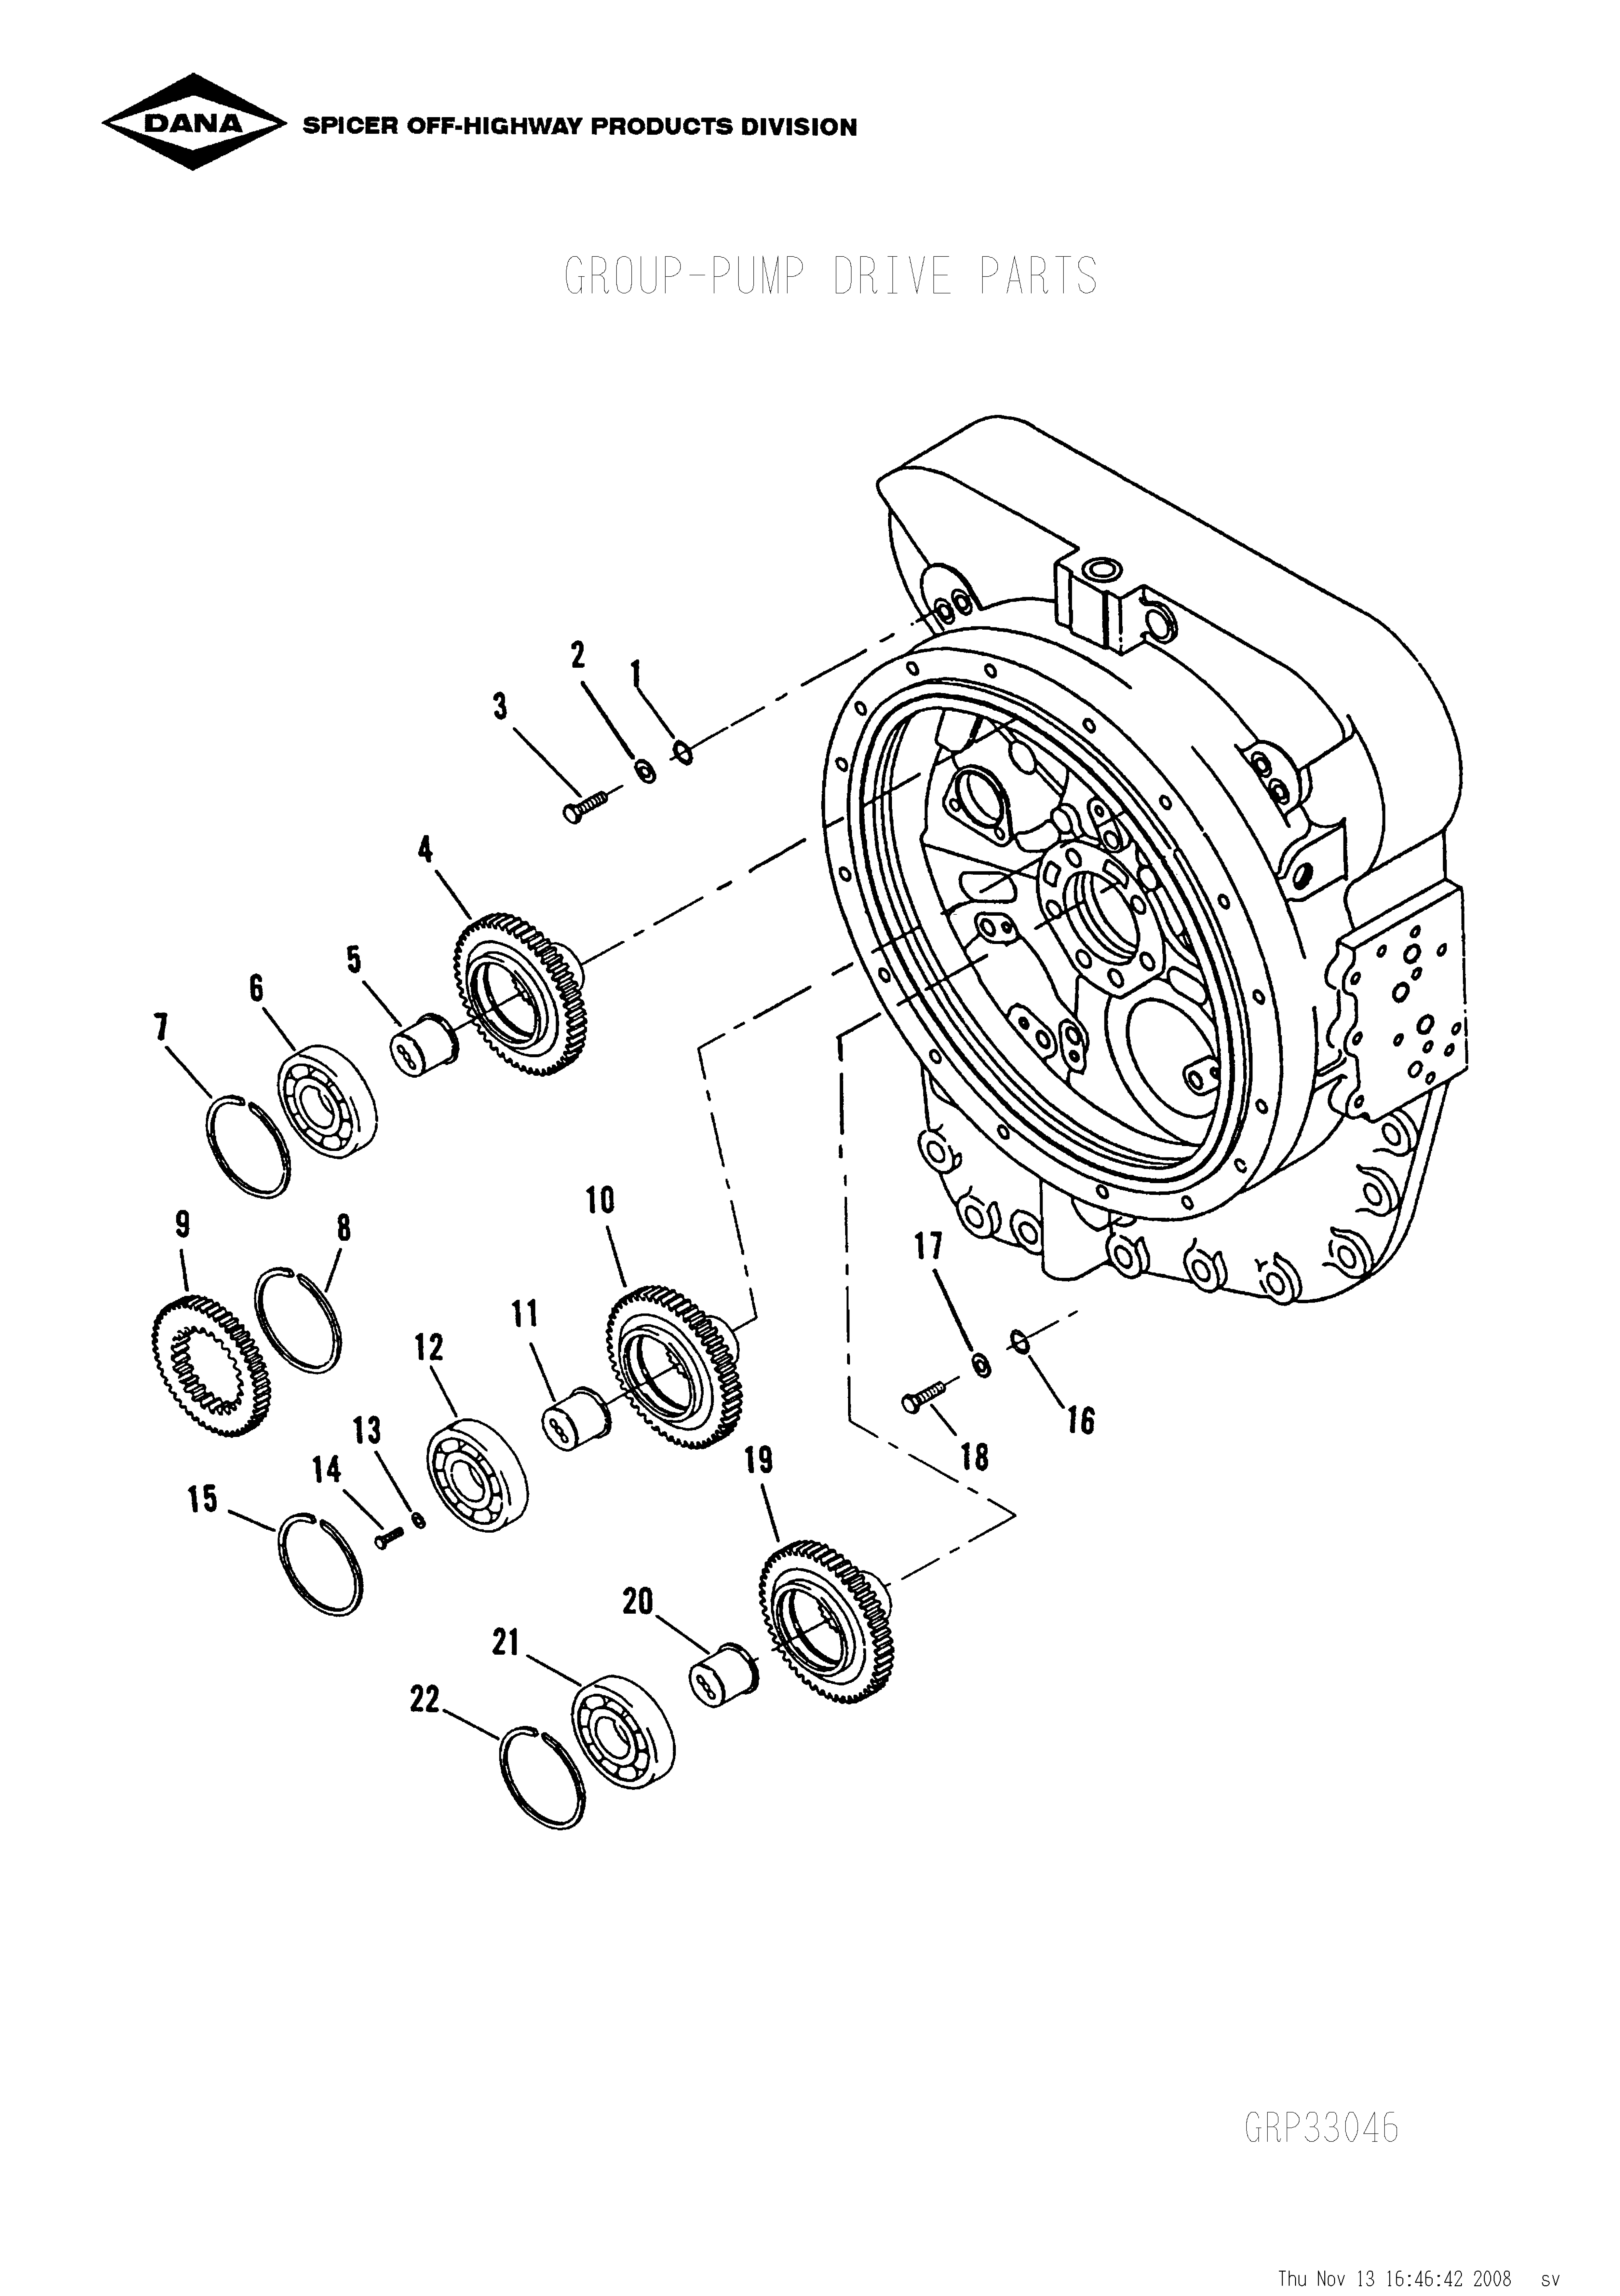 drawing for NACCO GROUP 0330531 - GEAR (figure 1)